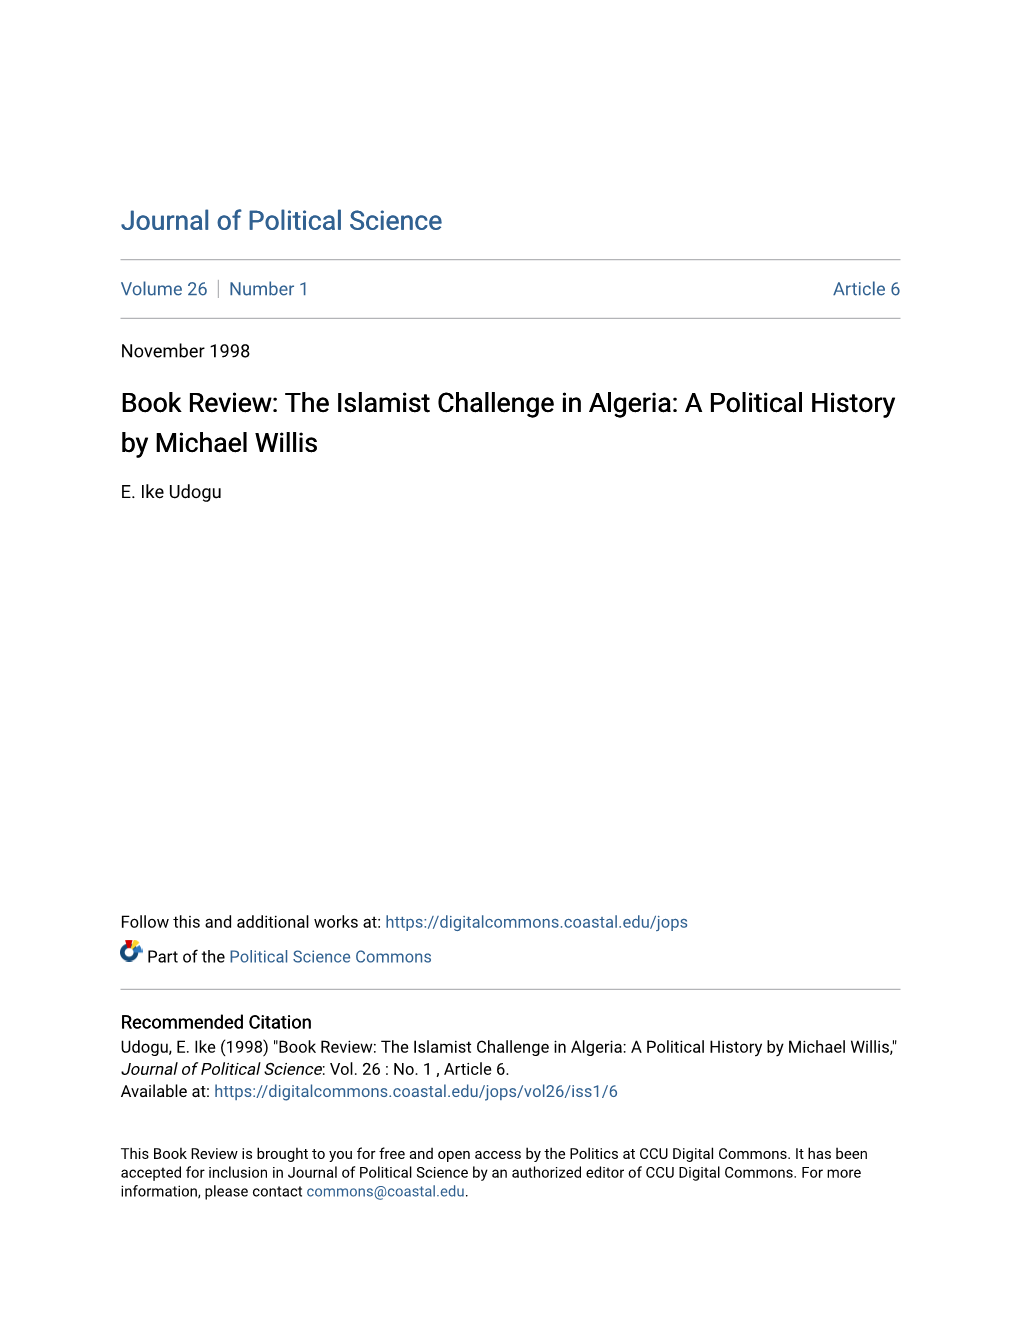 Book Review: the Islamist Challenge in Algeria: a Political History by Michael Willis